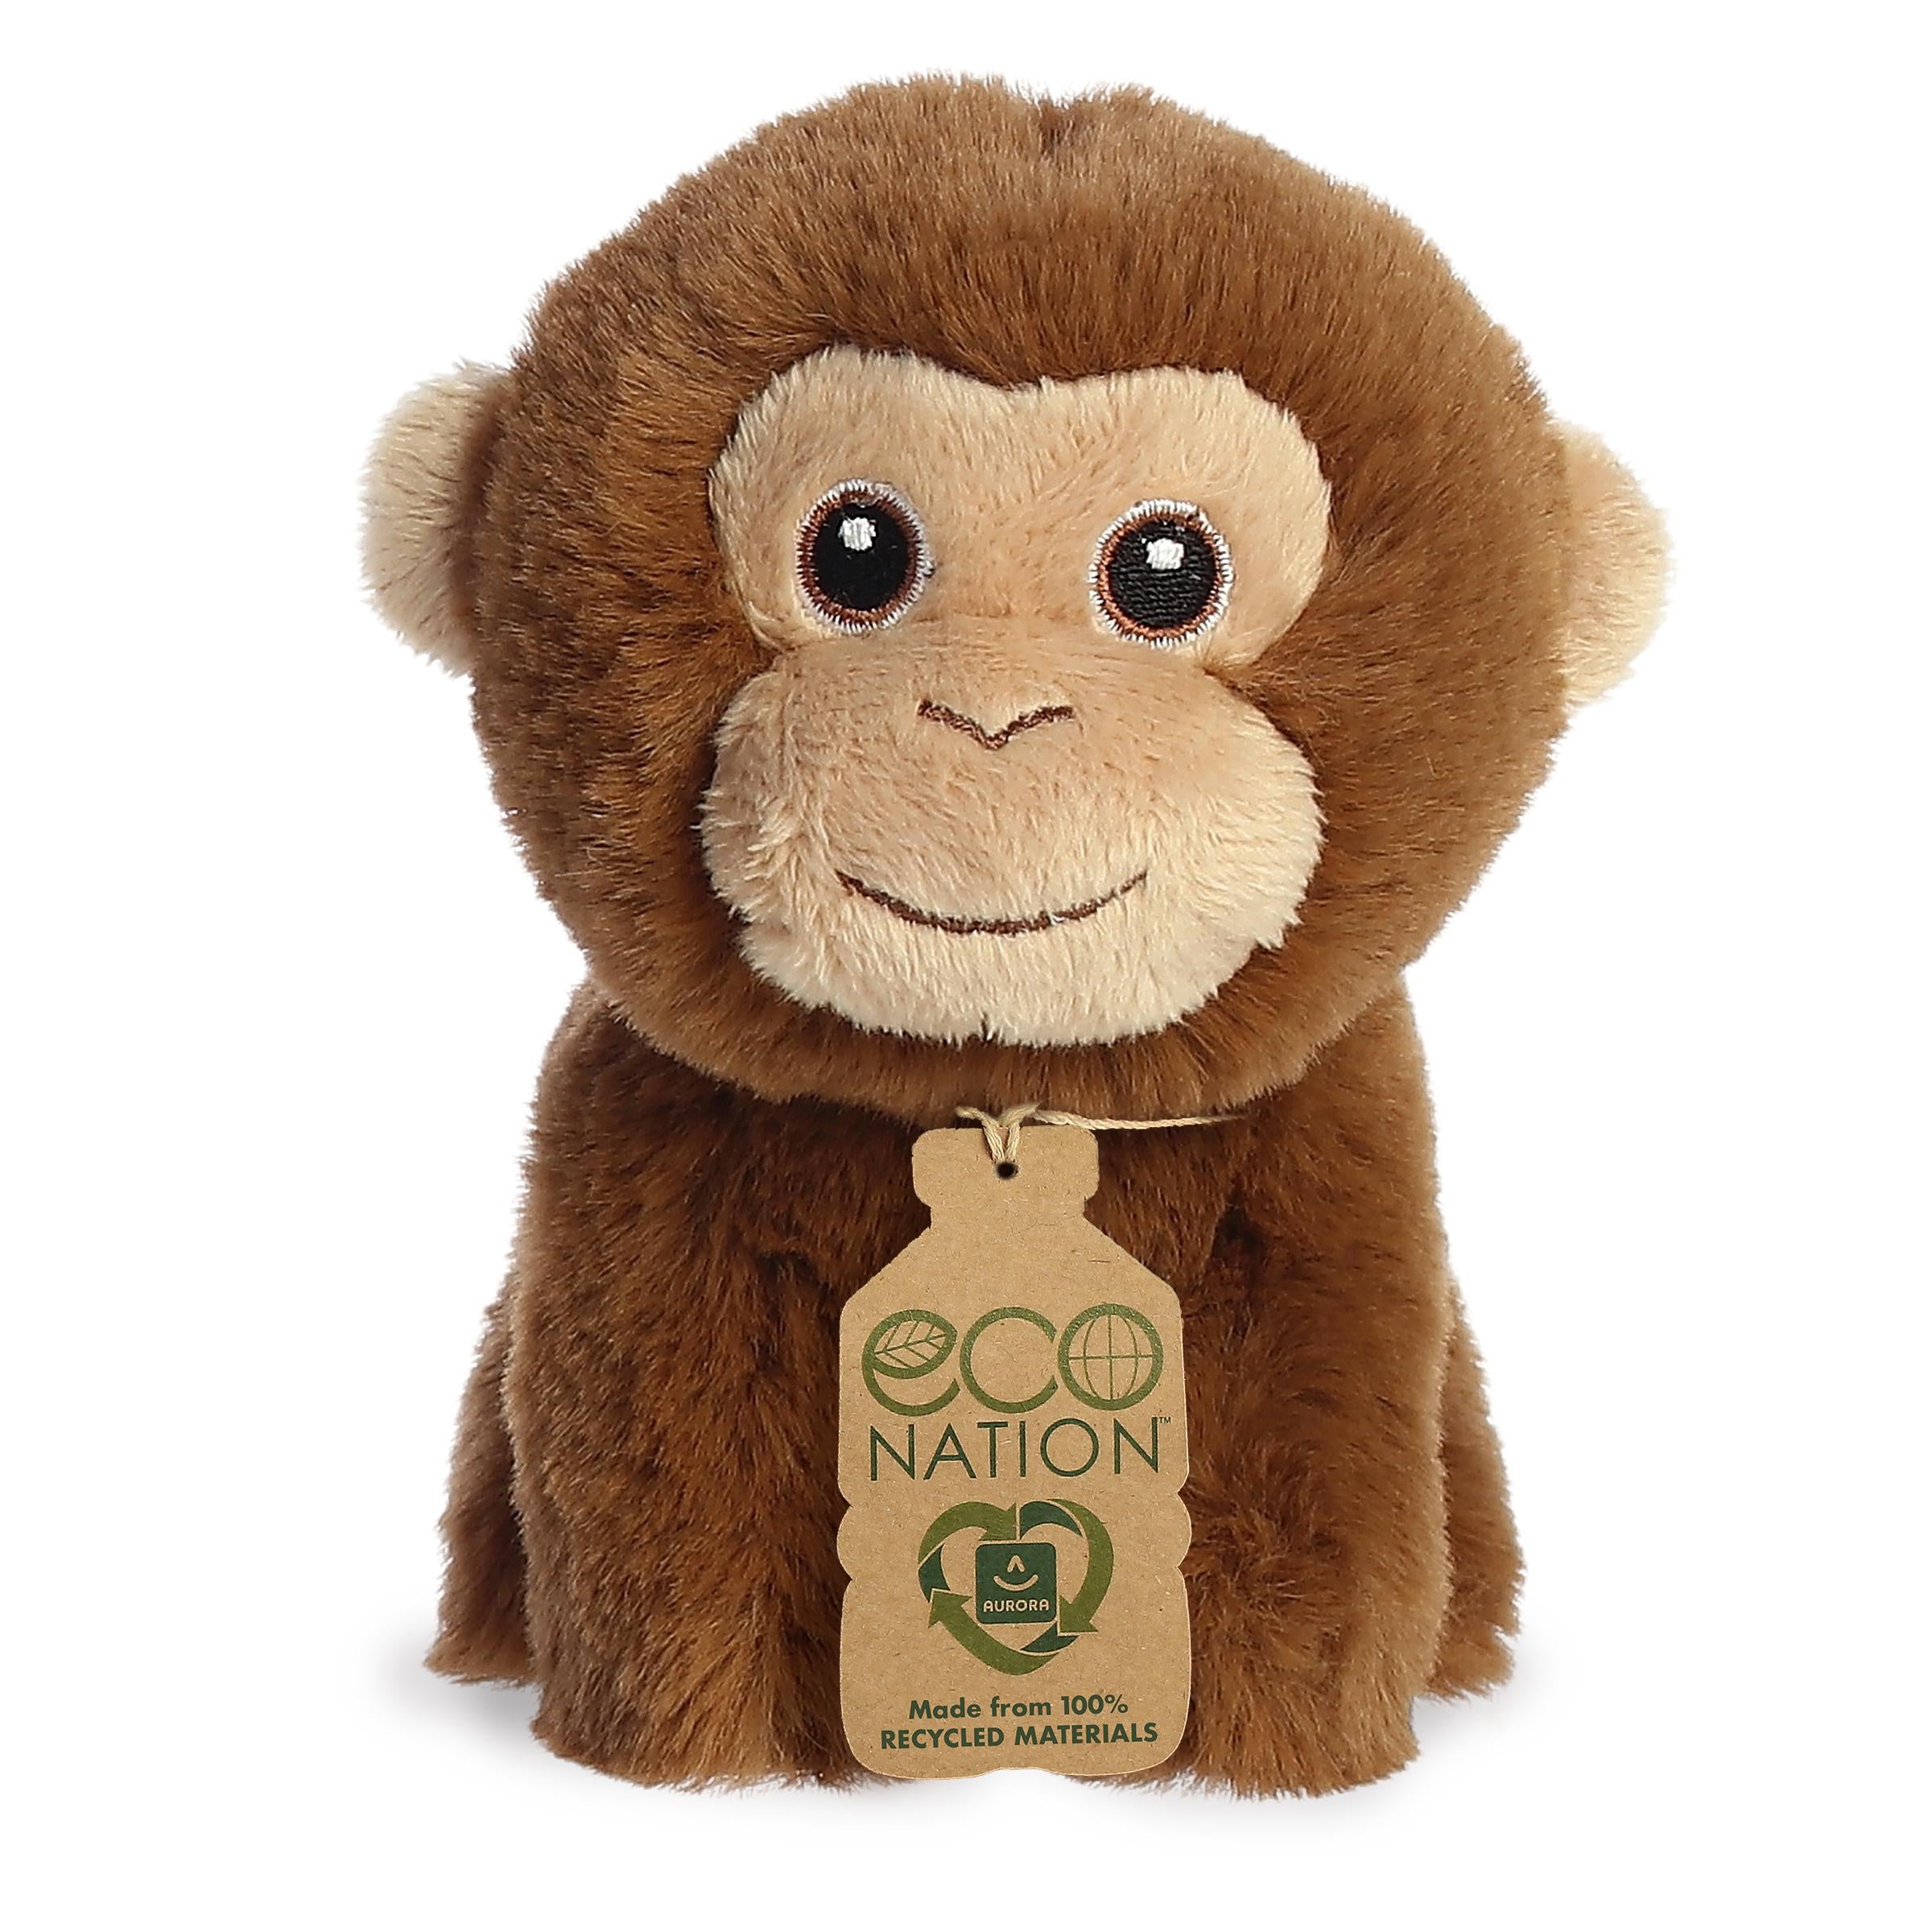 Darling mini monkey plush with a rich brown coat and sweet smile, embroidered eyes, and an eco-nation tag